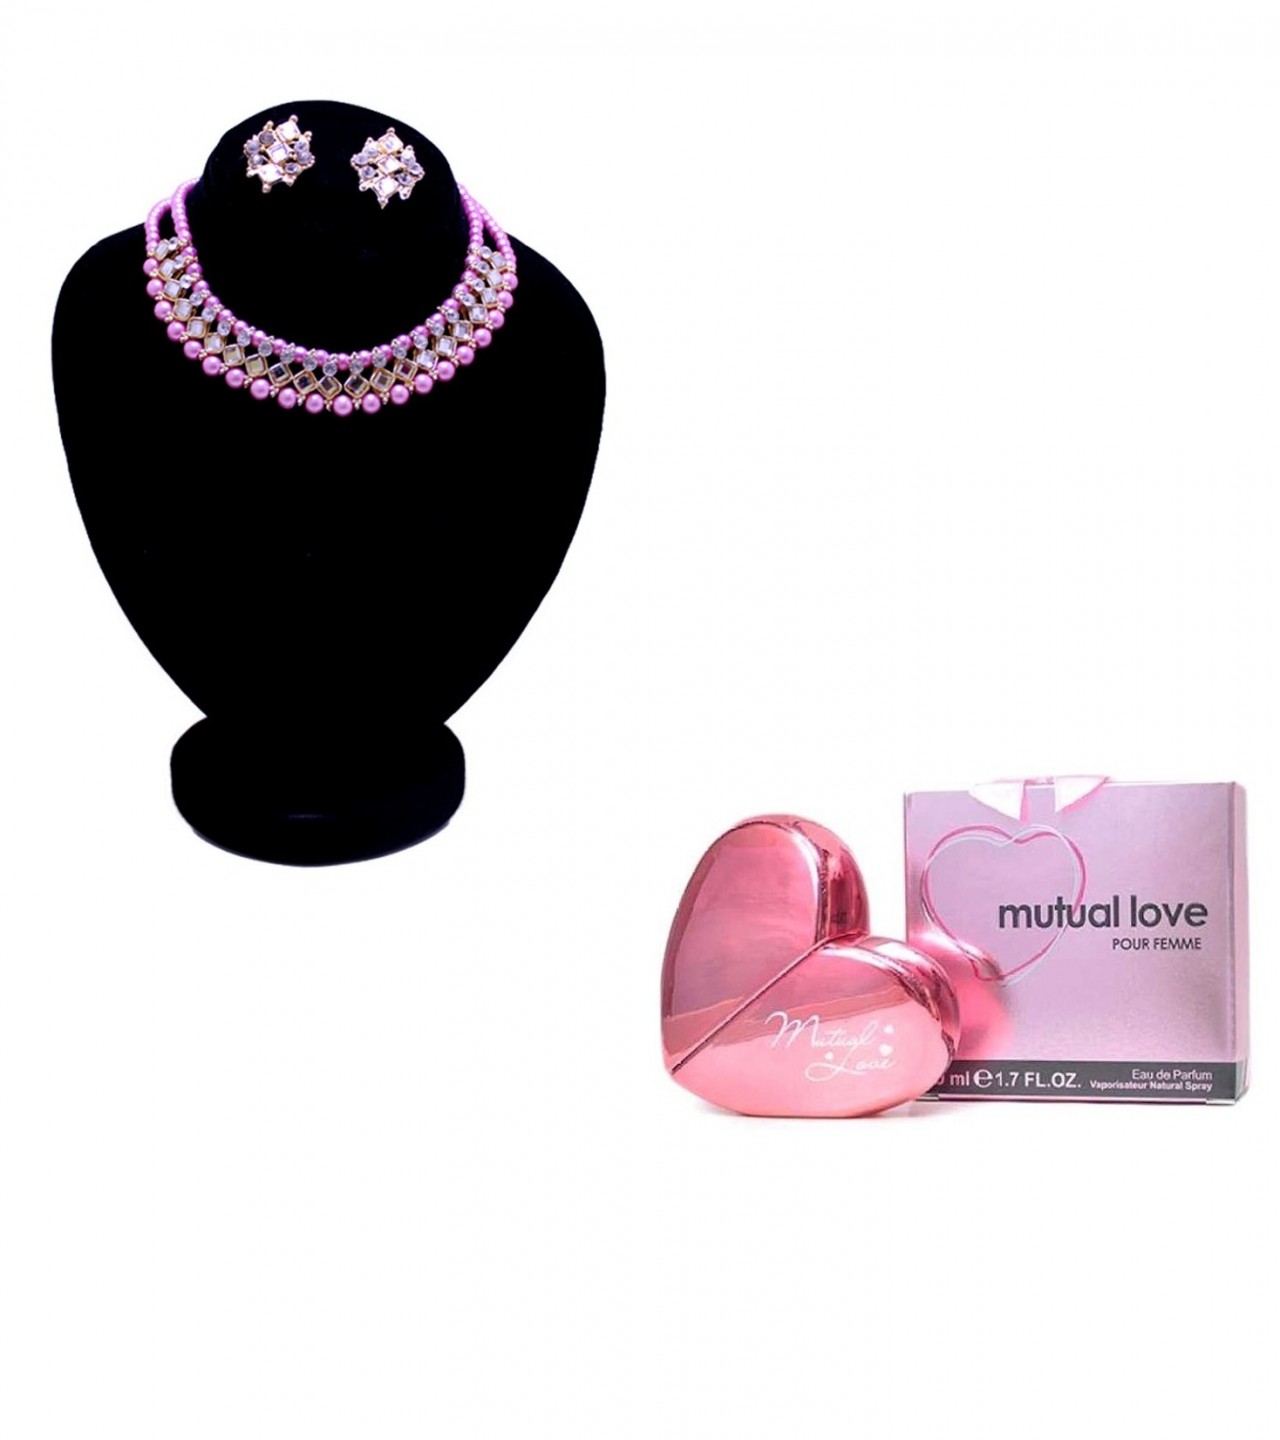 Combo of 2 - Pink Jewelry Set & Mutual Love Perfume 50 ml for Women - Pink